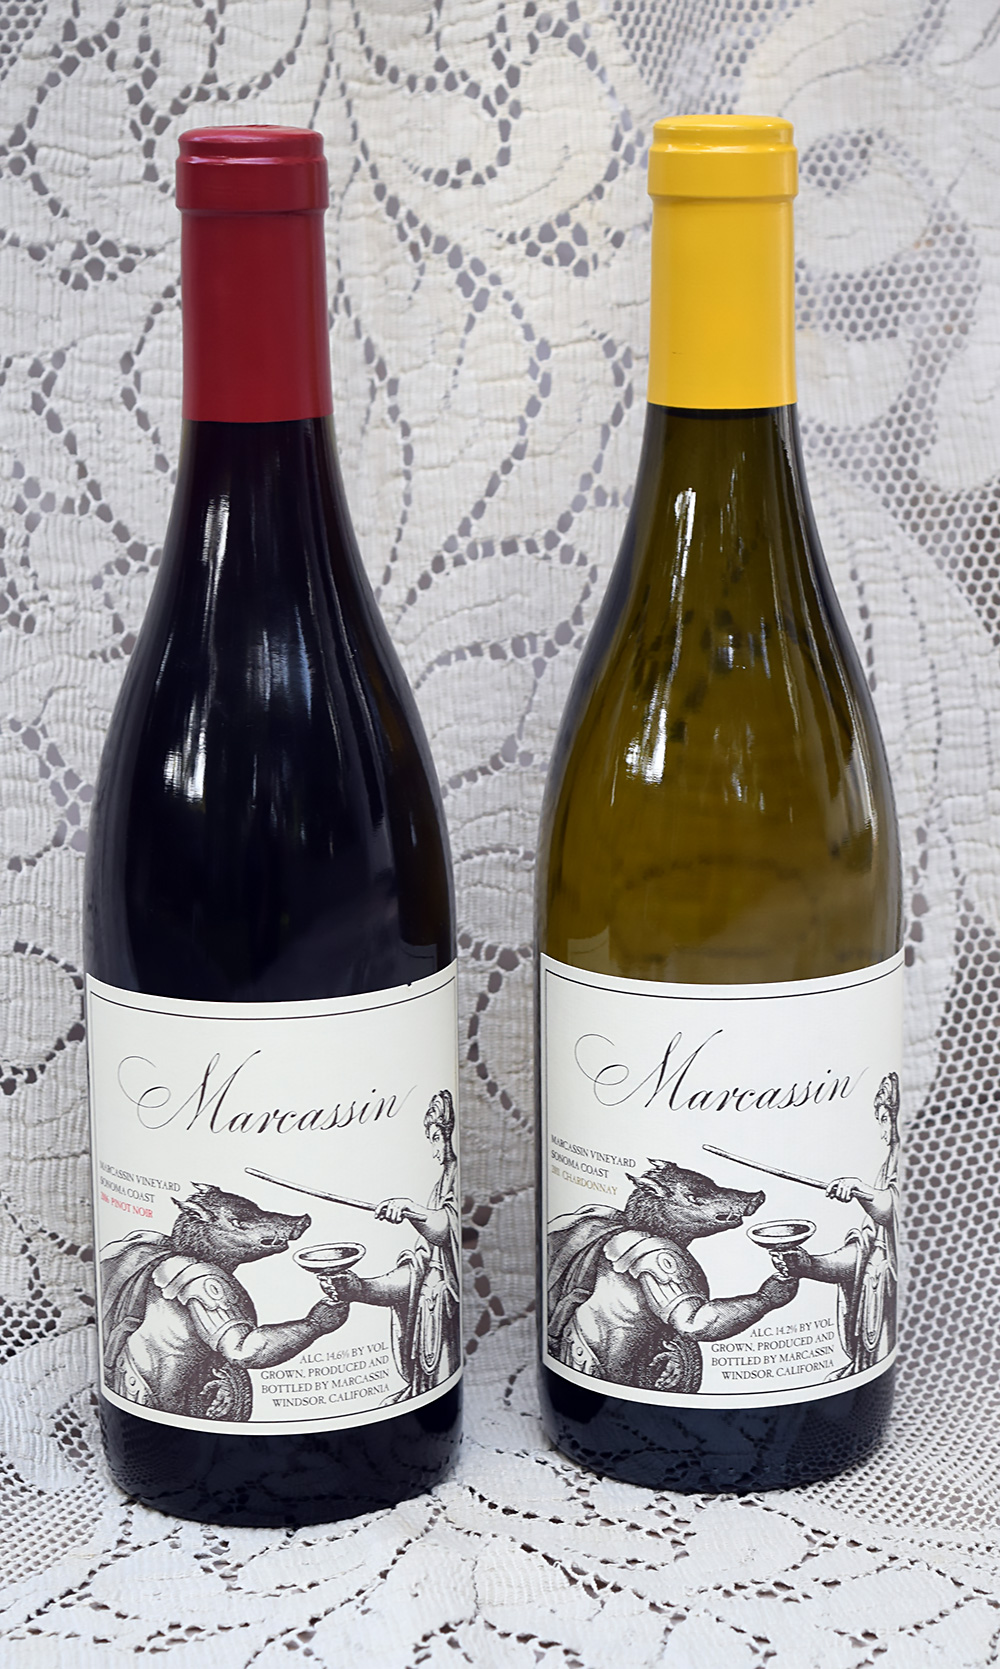 While most of the cult wines in California are Napa cabernets and cabernet blends, Marcassin Vineyards, whose grapes are grown on the Sonoma Coast, makes pinot noirs and chardonnays that are craved by some aficionados of these cool-climate varietals.